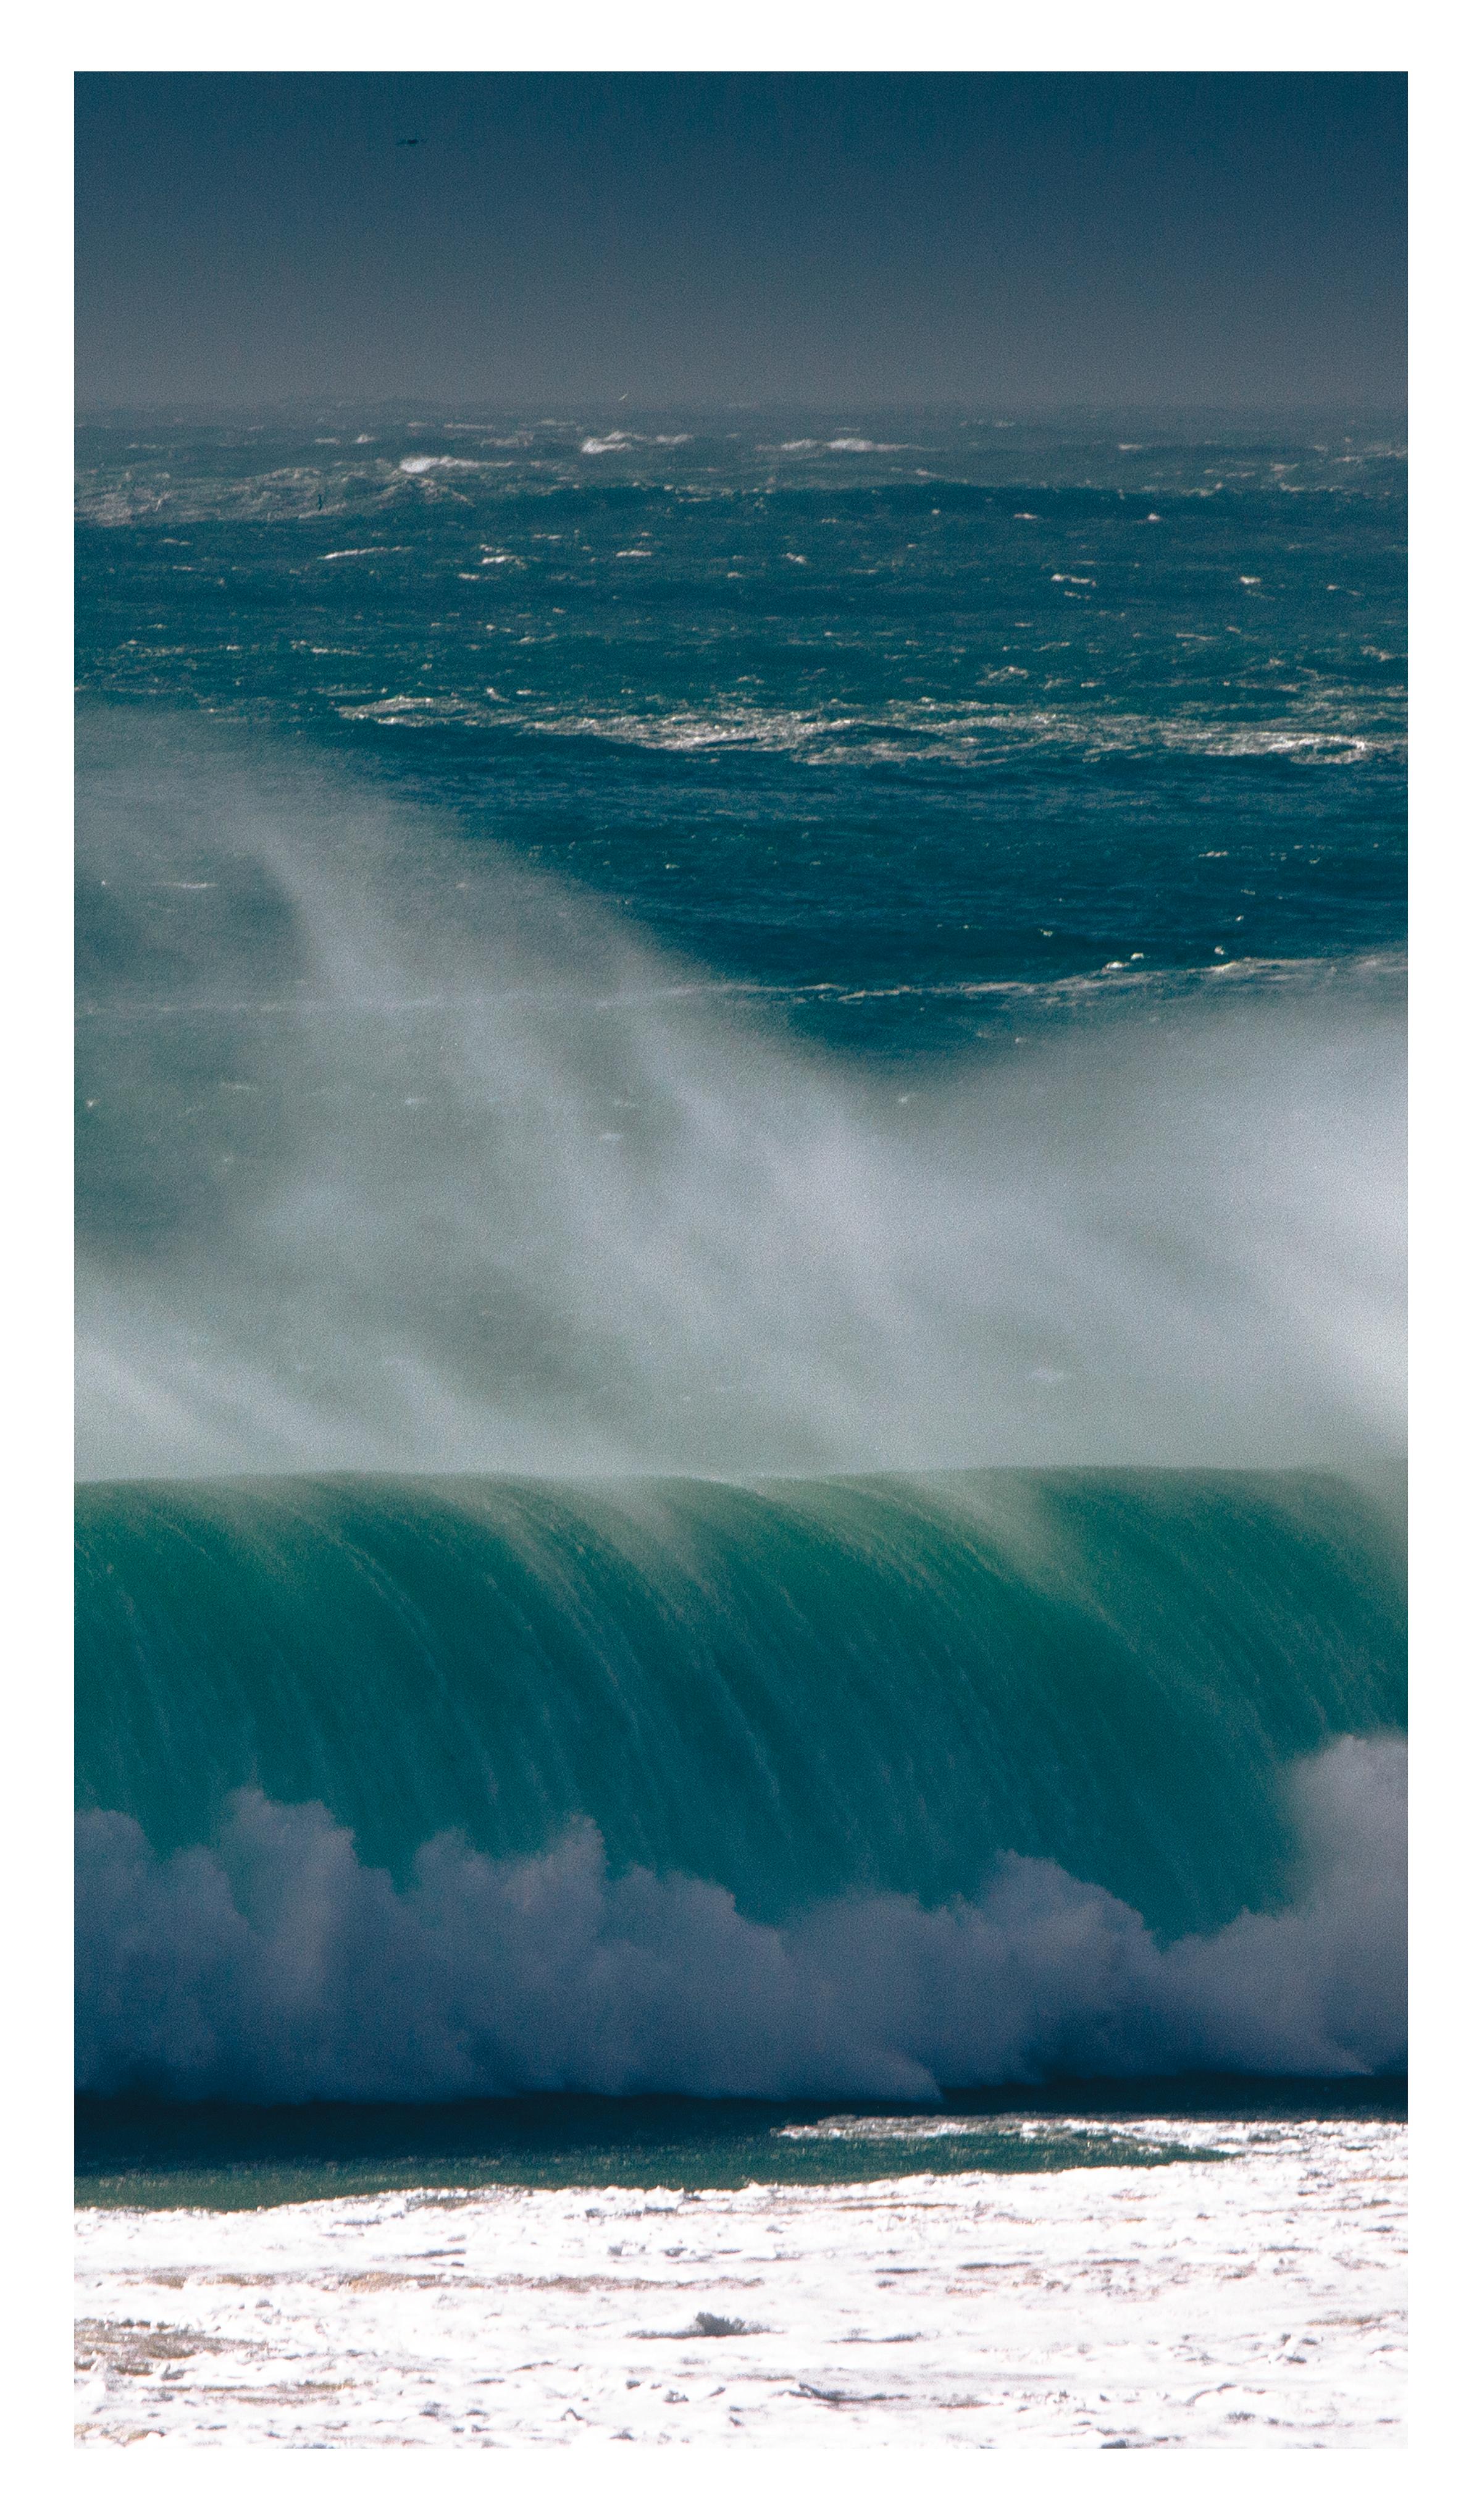 'Pounding Heart' 
Archival photographic triptych. Limited Edition of 25. Unframed.
_________________
The wild Atlantic explodes in a raw release of energy, the graceful formation of the great waves a counterbalance to the thunder and beat of the